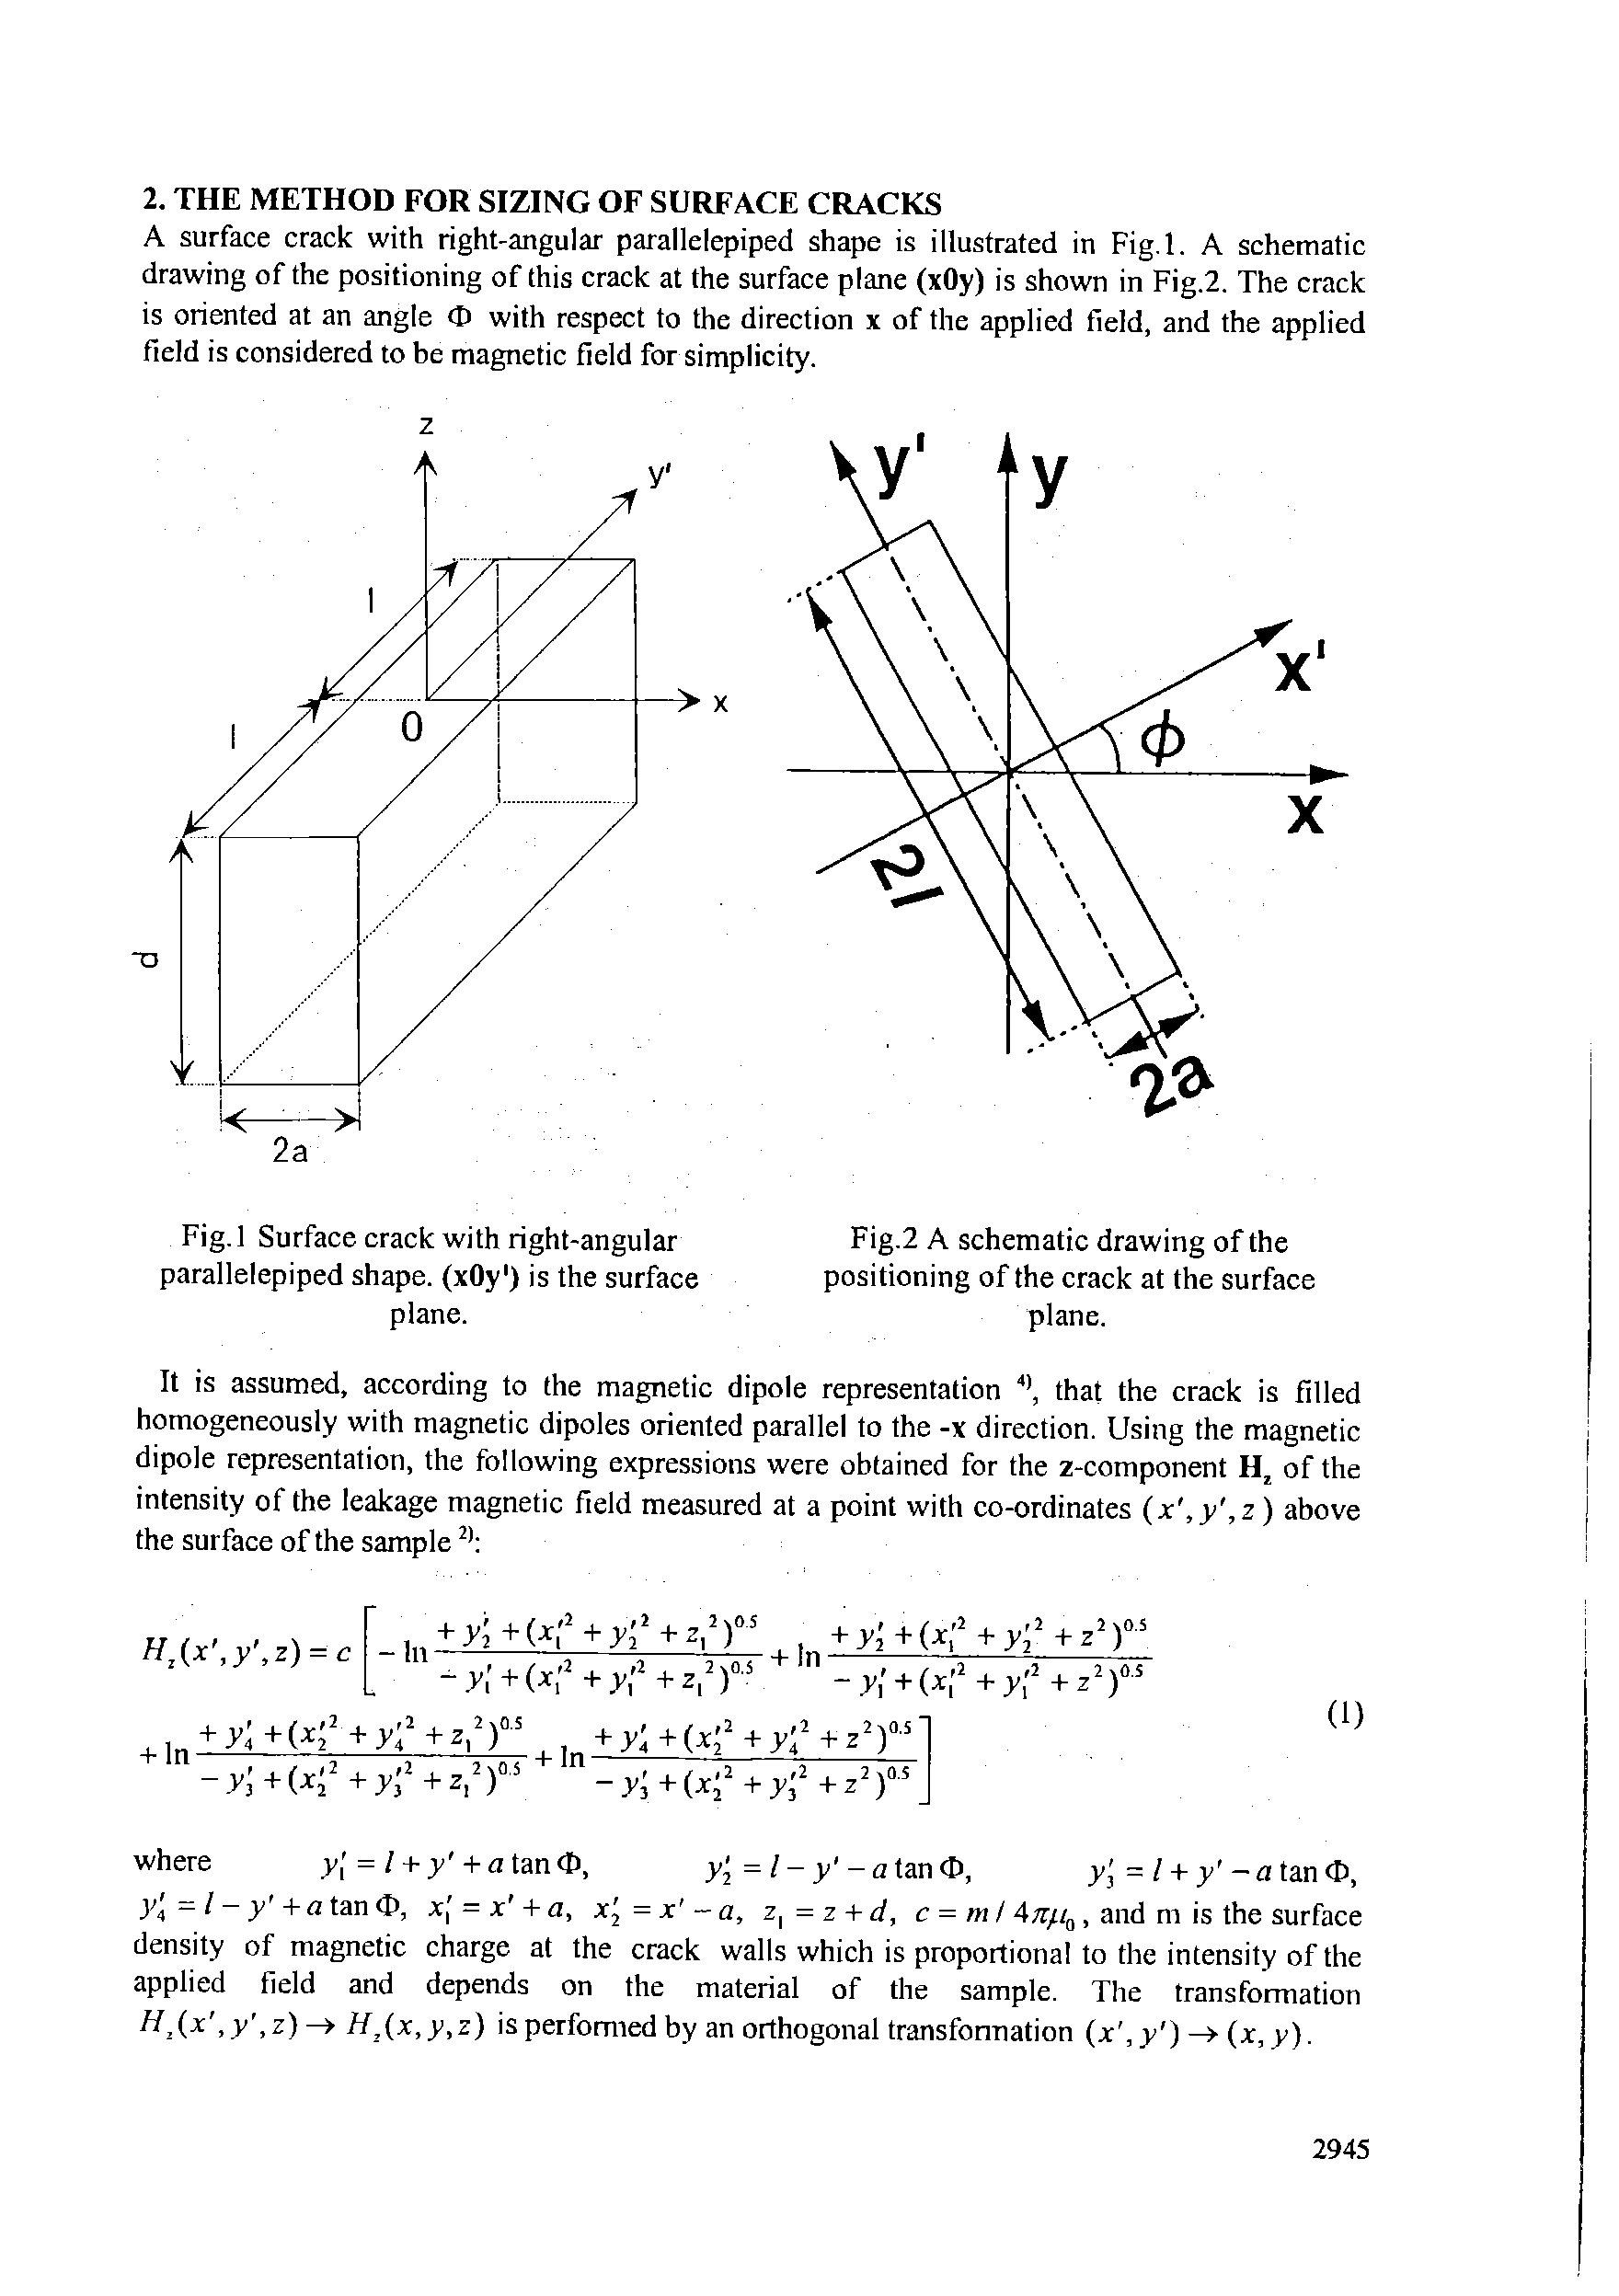 Fig.2 A schematic drawing of the positioning of the crack at the surface plane.